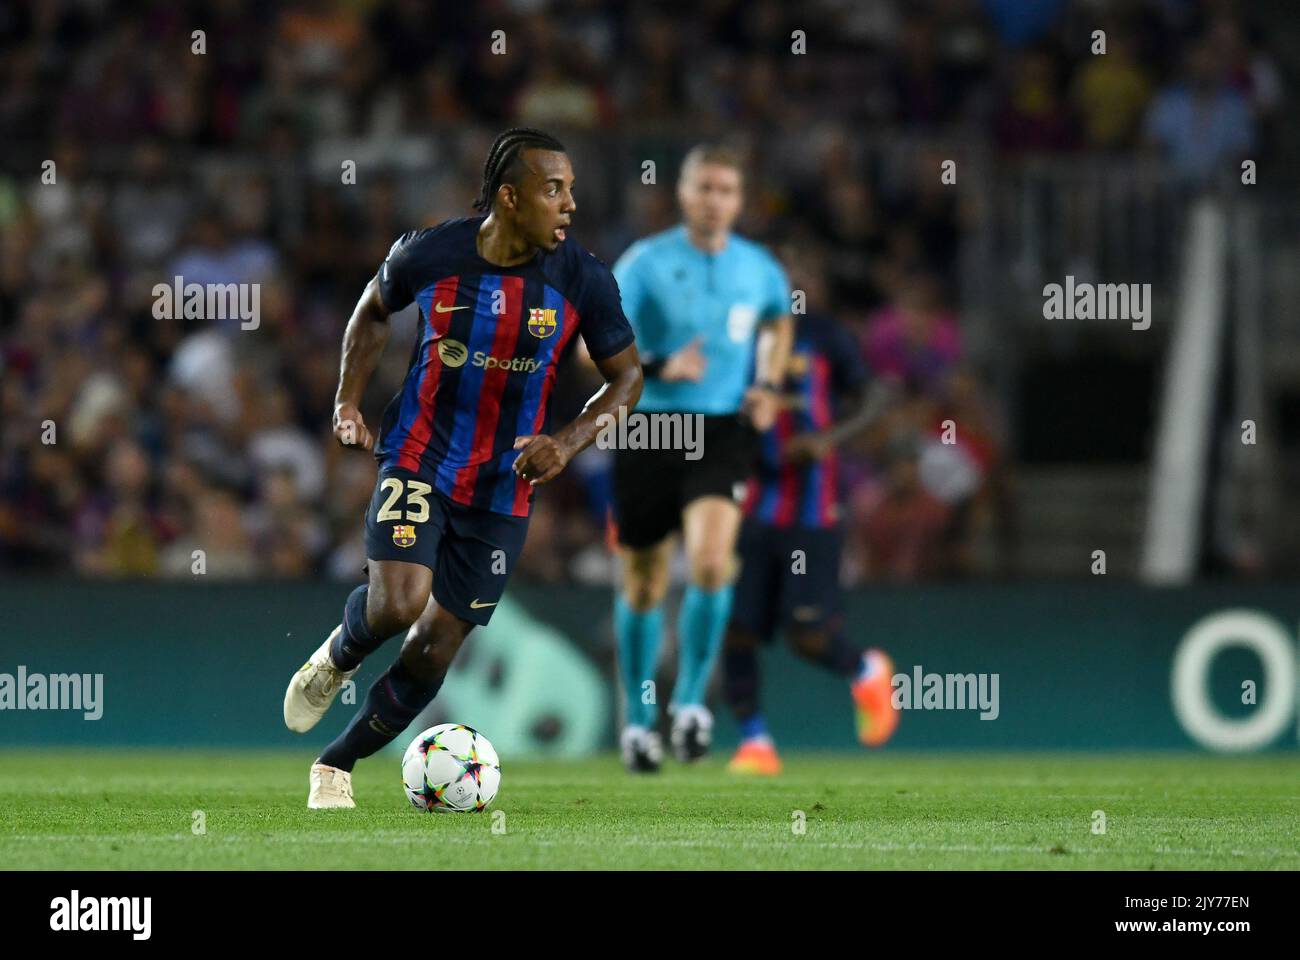 Barcelona, Spain. 07th Sep, 2022. Jules Kounde (23) of FC Barcelona during the match between FC Barcelona and FC Viktoria Plzen corresponding to the first day of the group stage of the UEFA Champions League at Spotify Camp Nou Stadium in Barcelona, Spain. September 7, 2022. Credit: rosdemora/Alamy Live News Stock Photo